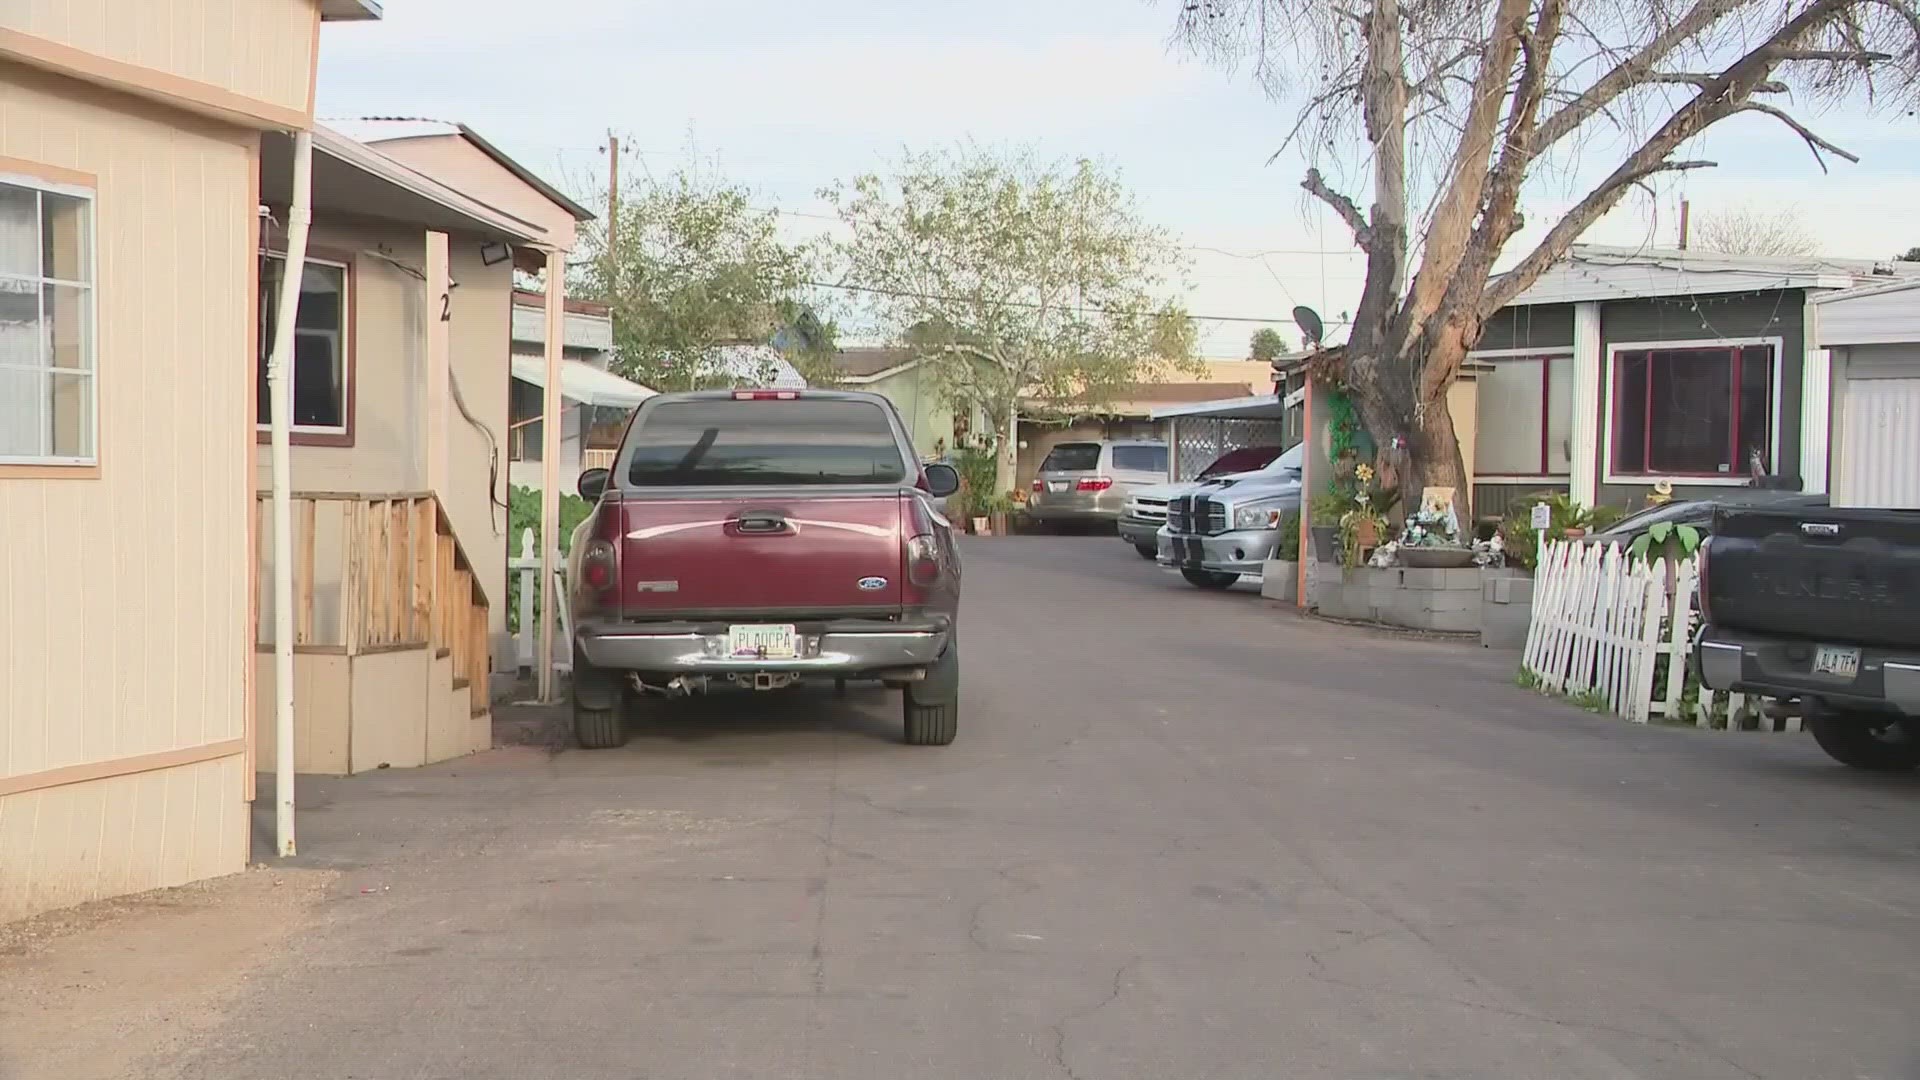 About 46 families are being displaced from Periwinkle Mobile Home Park in Phoenix. Others will soon follow suit.